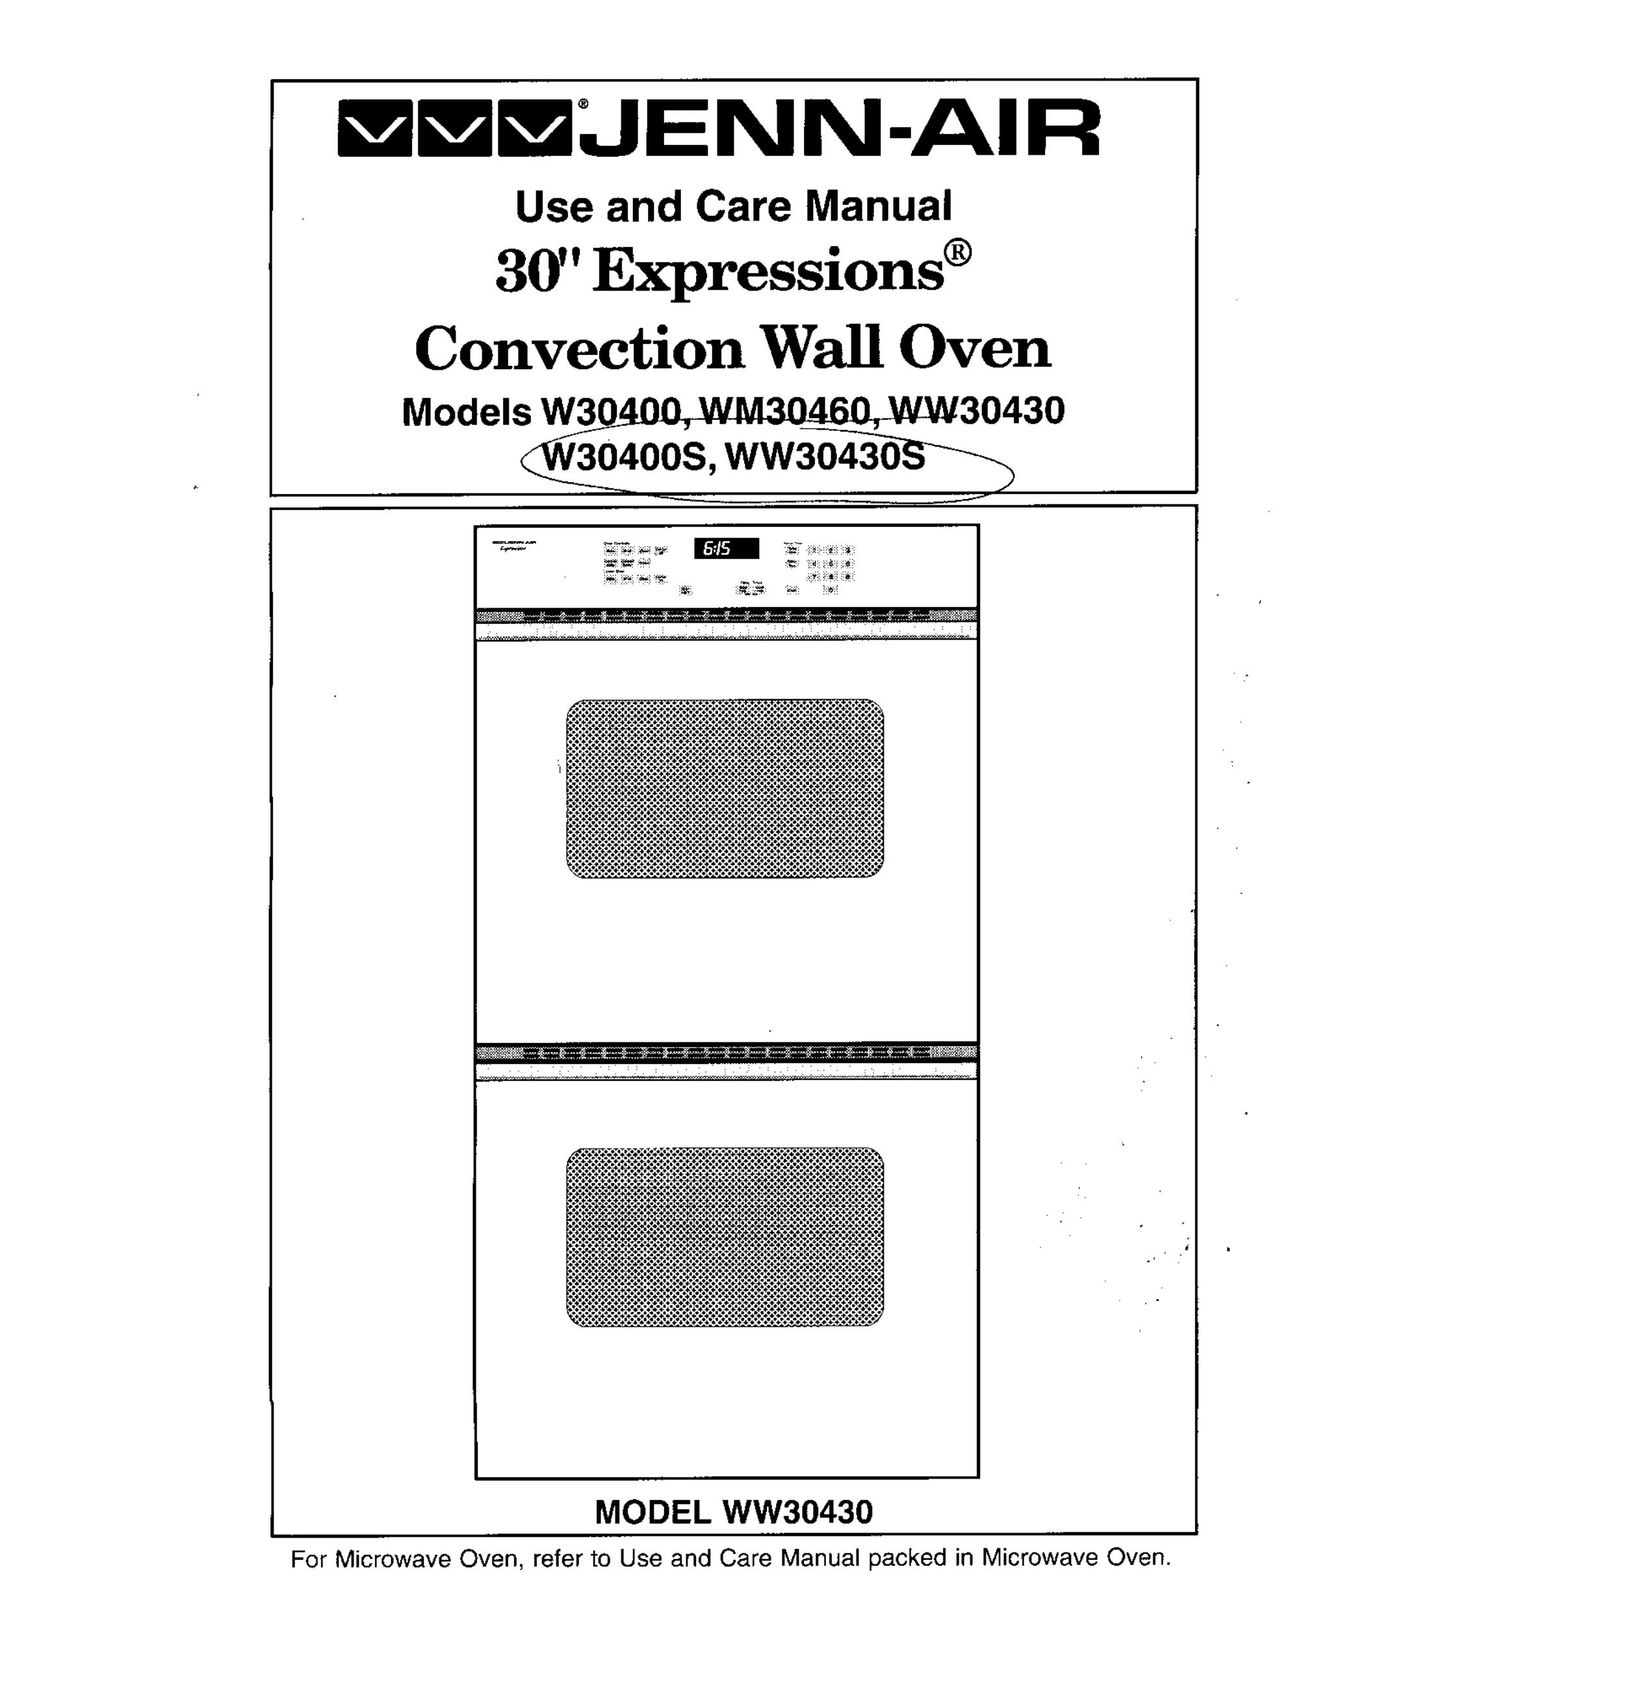 Jenn-Air WW30430S Convection Oven User Manual